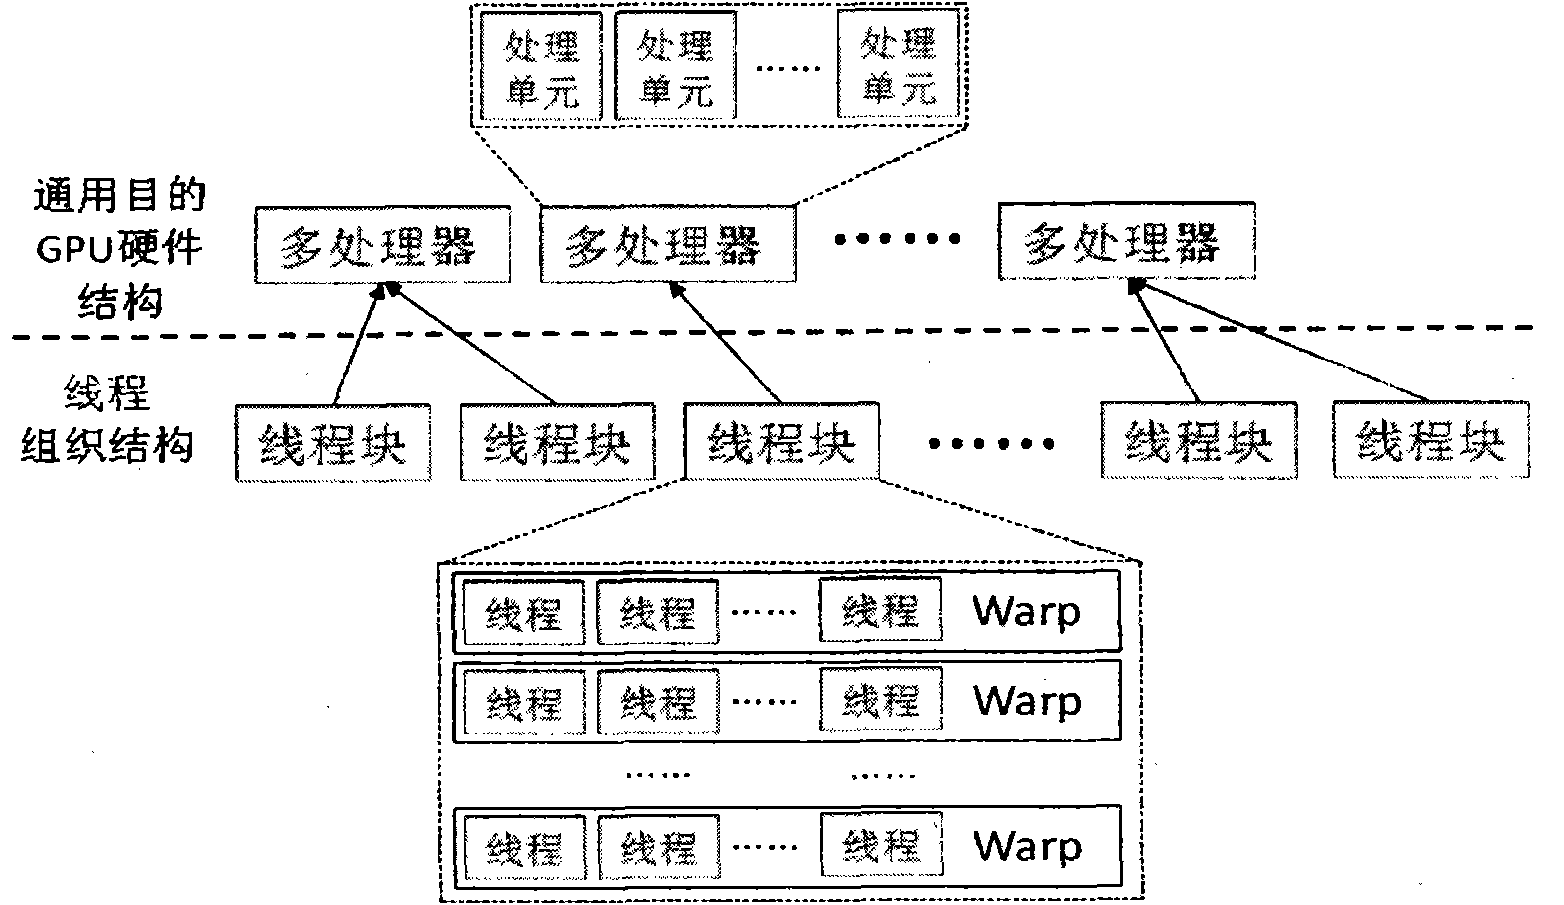 GPU (Graphics Processing Unit) acceleration method used for hierarchical searching motion estimation